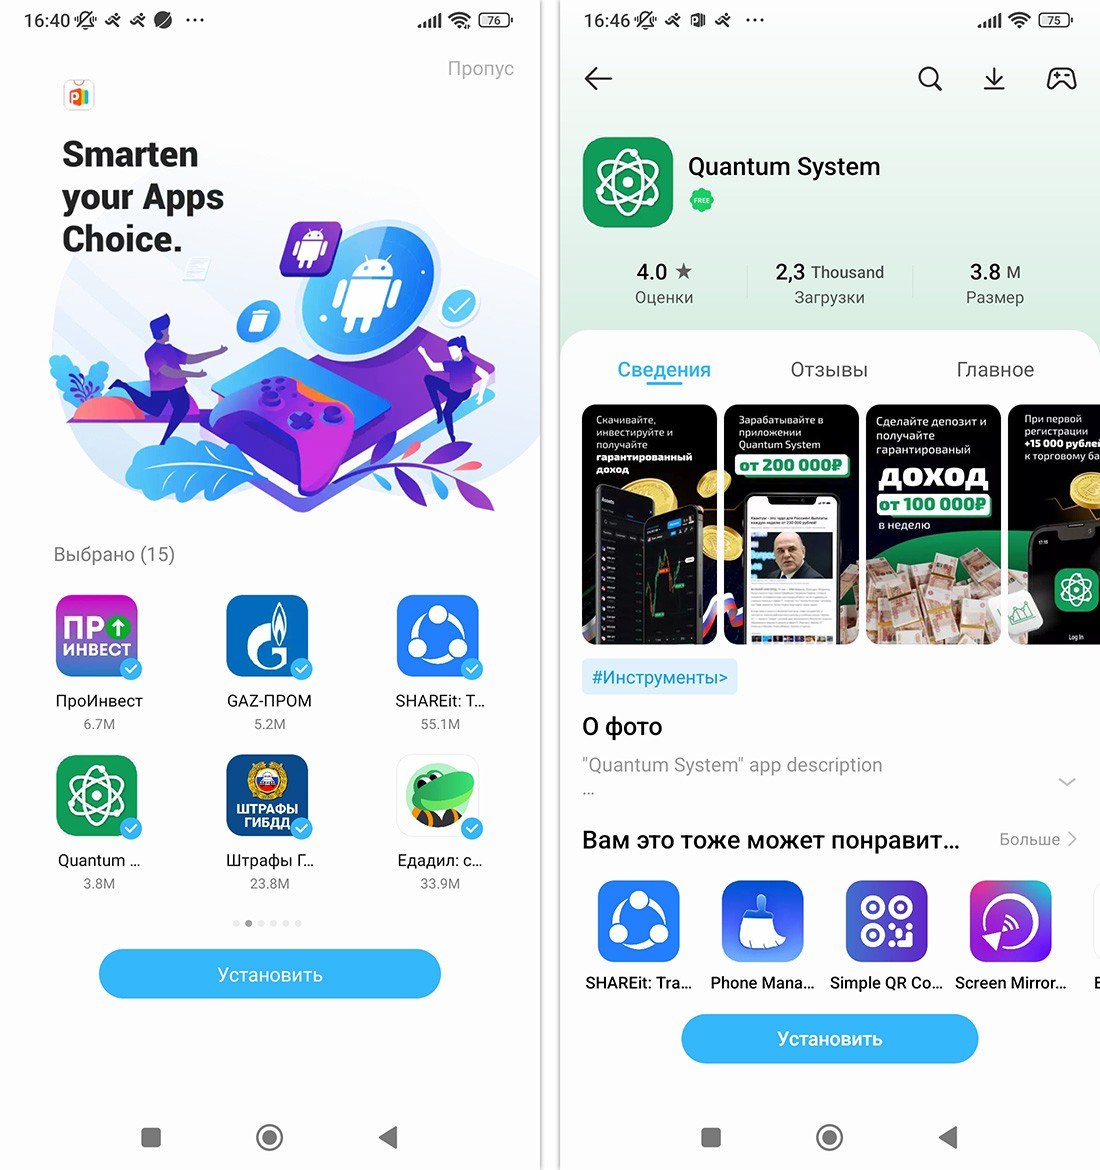 Scam investment apps in Palm Store's recommended list